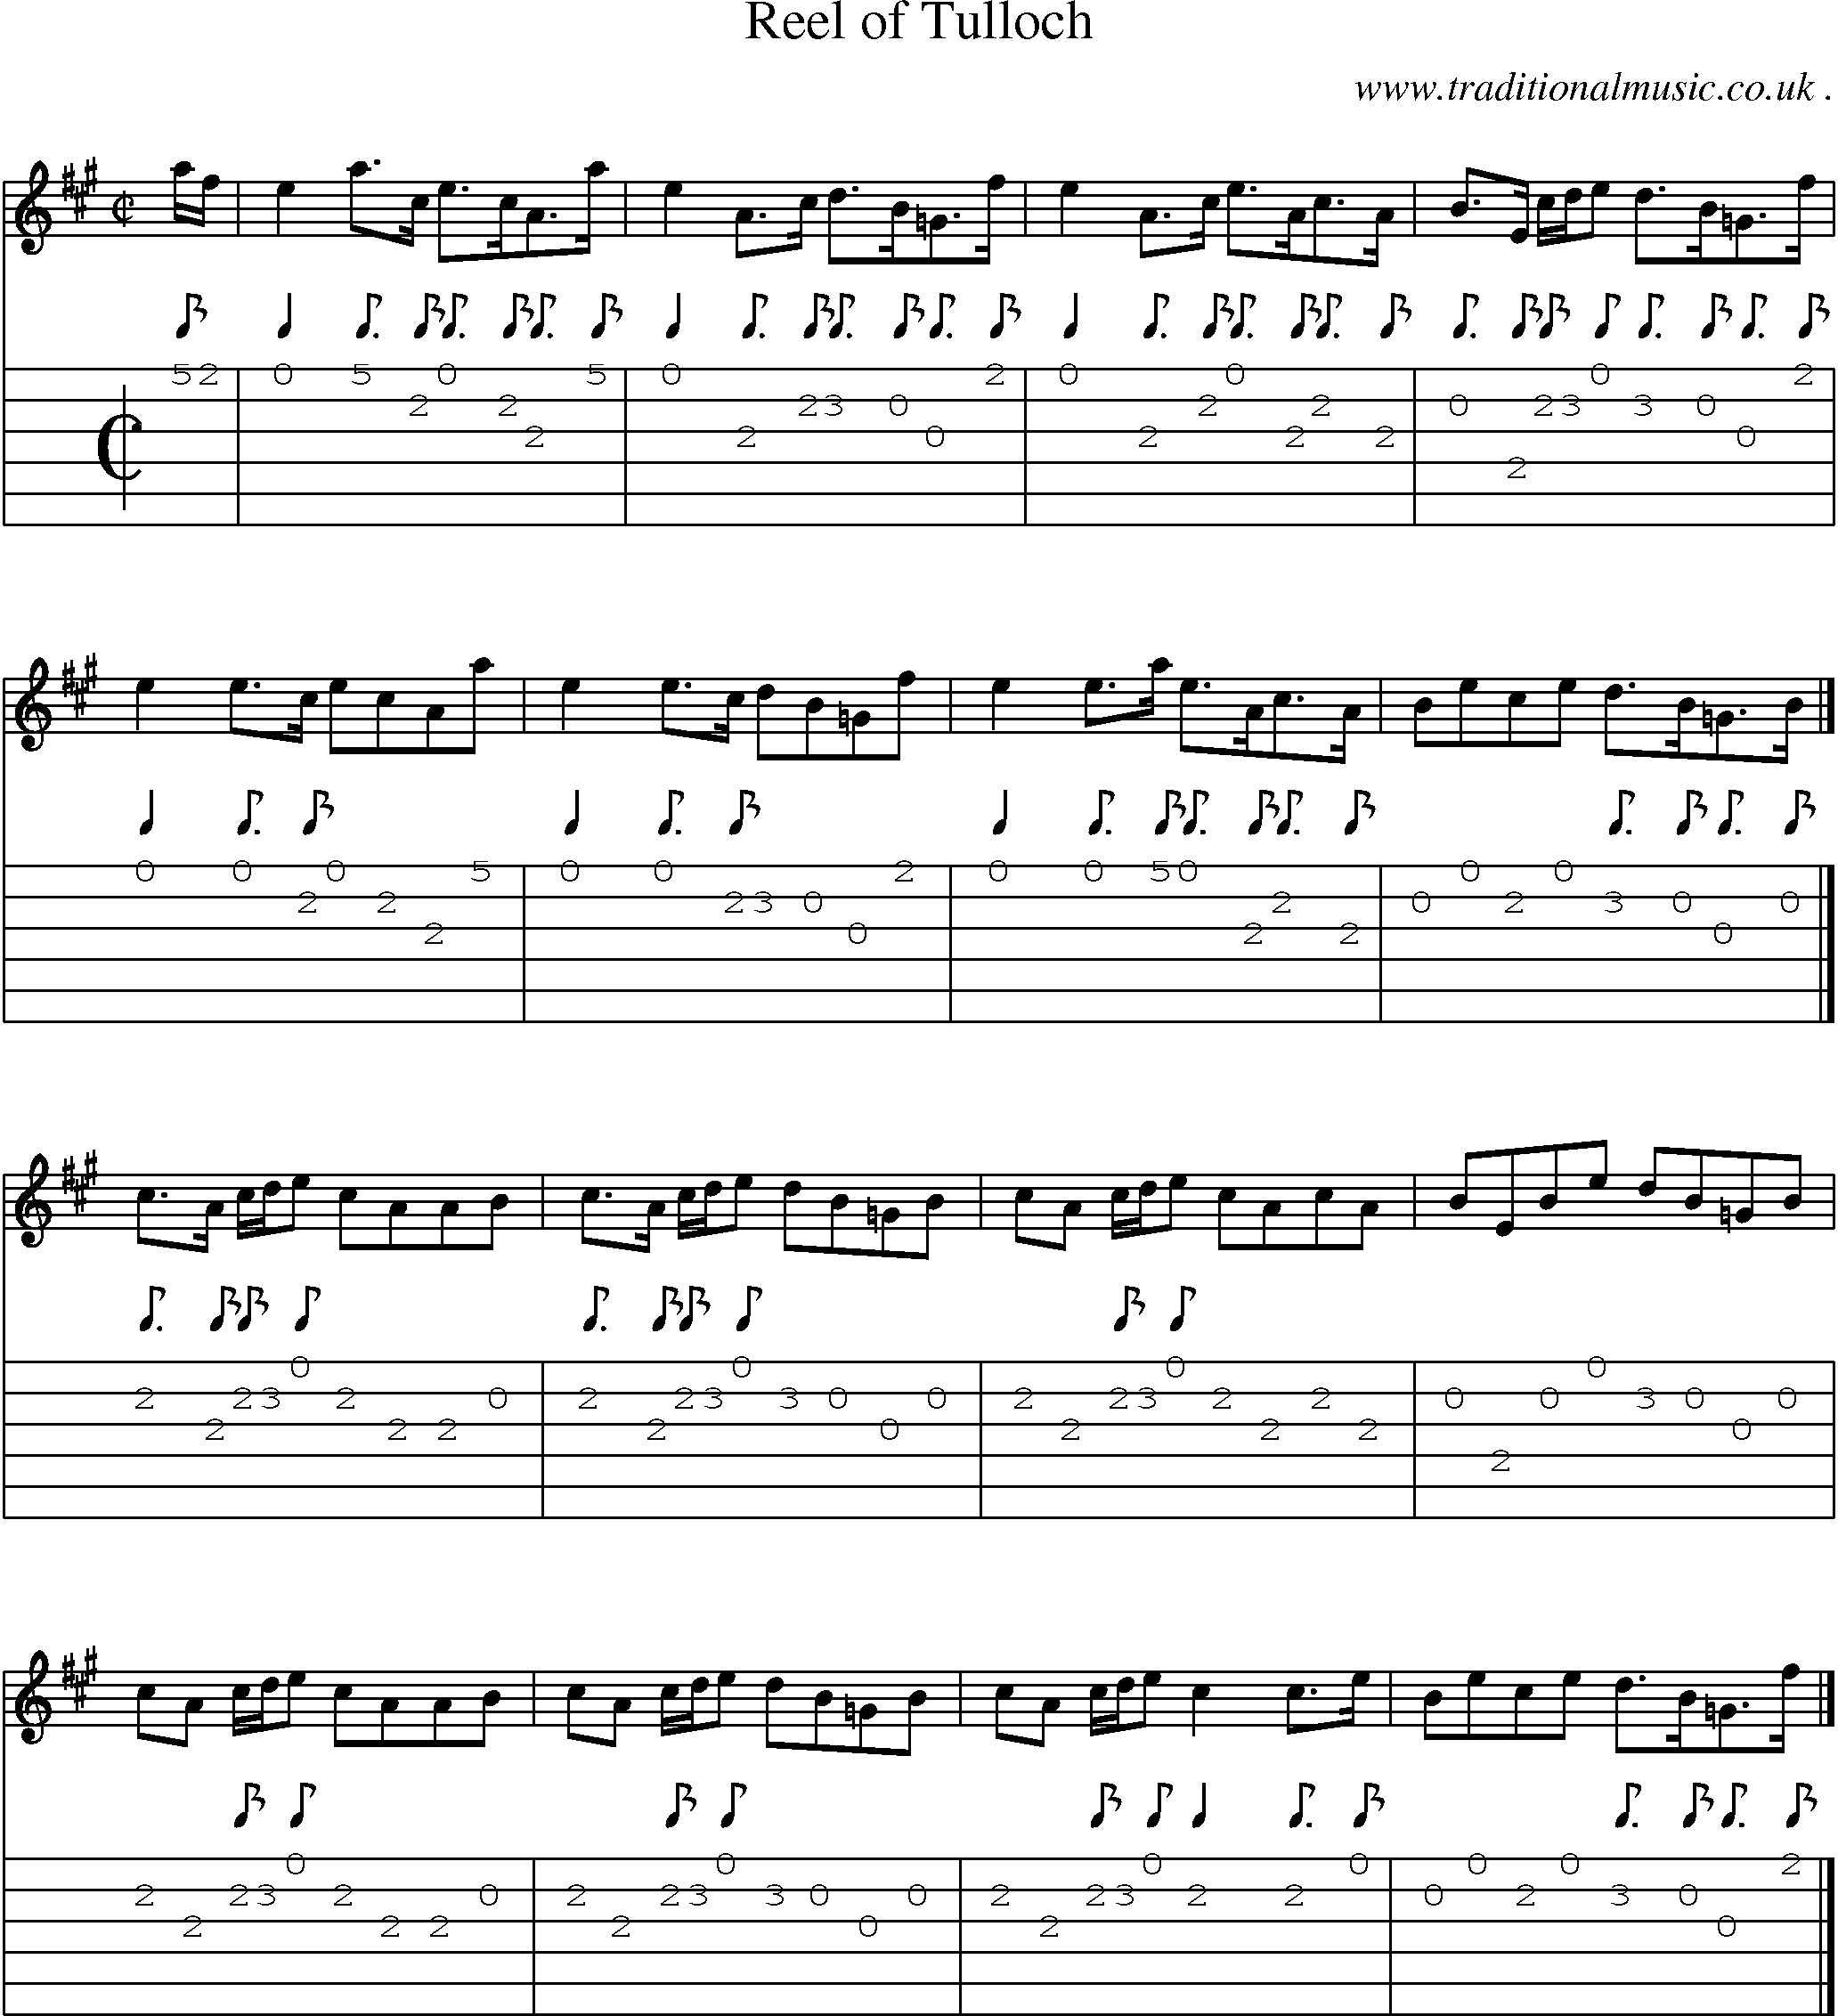 Sheet-music  score, Chords and Guitar Tabs for Reel Of Tulloch